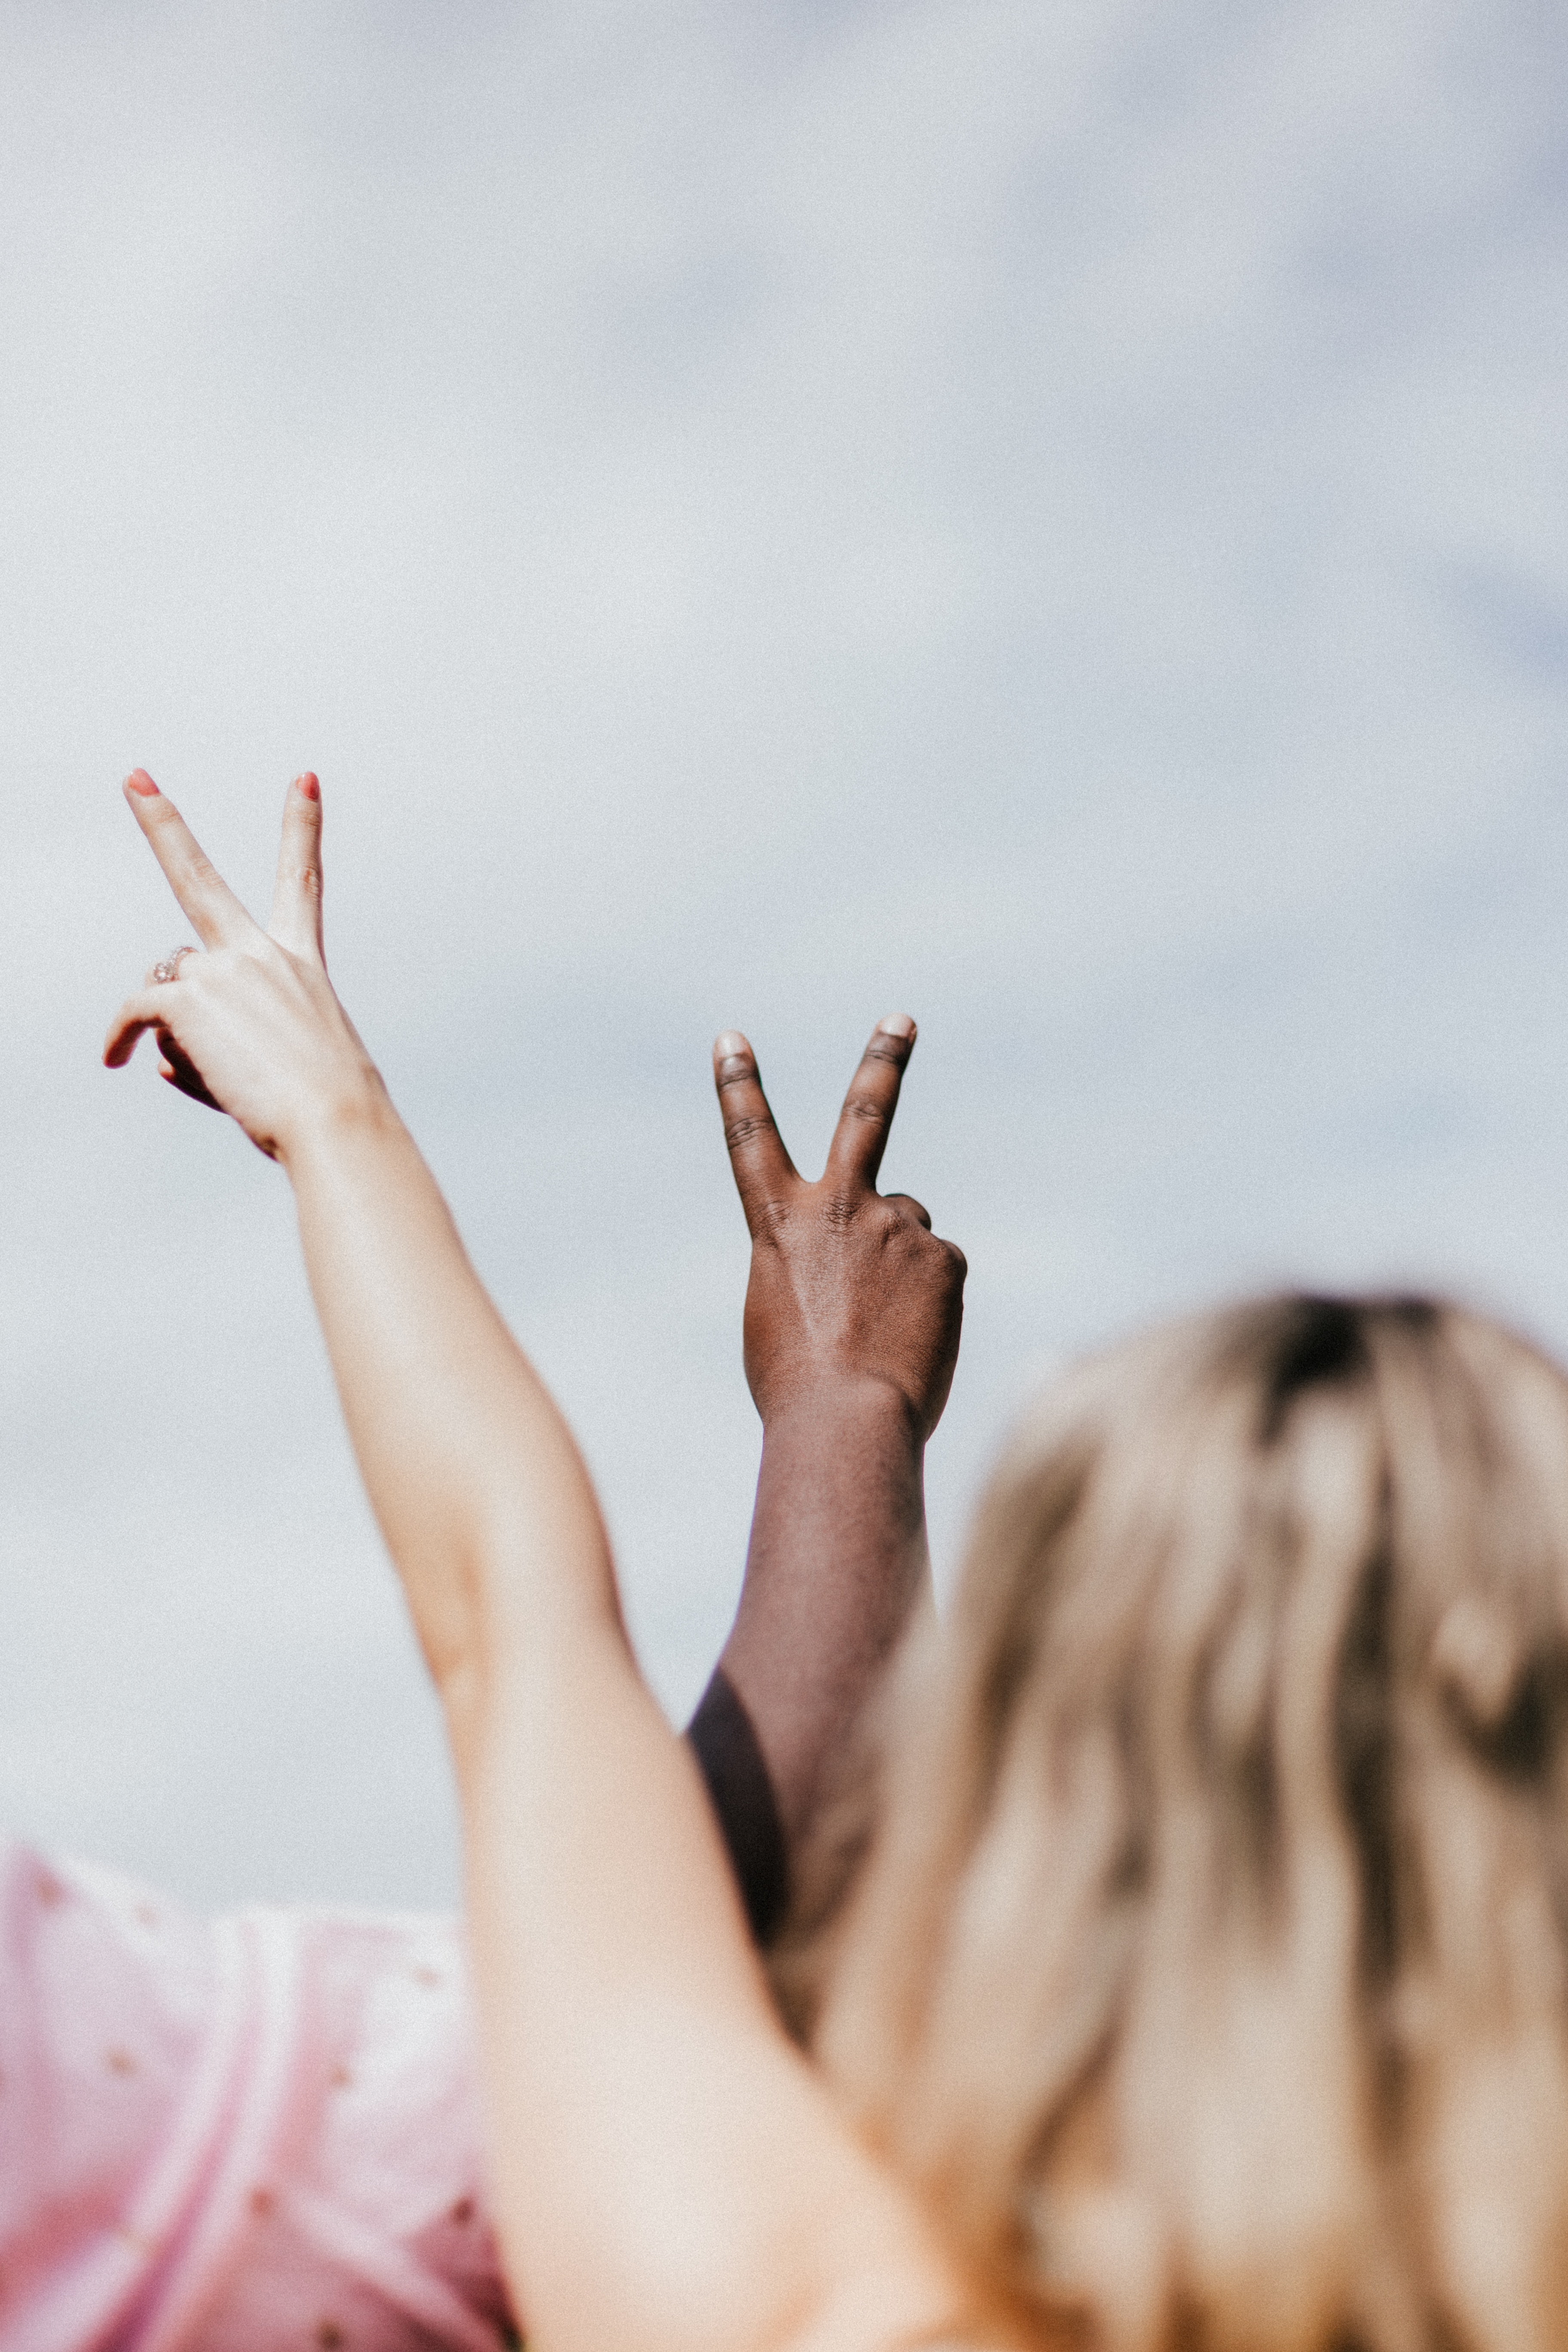 Two individuals holding up a peace sign | Source: Unsplash